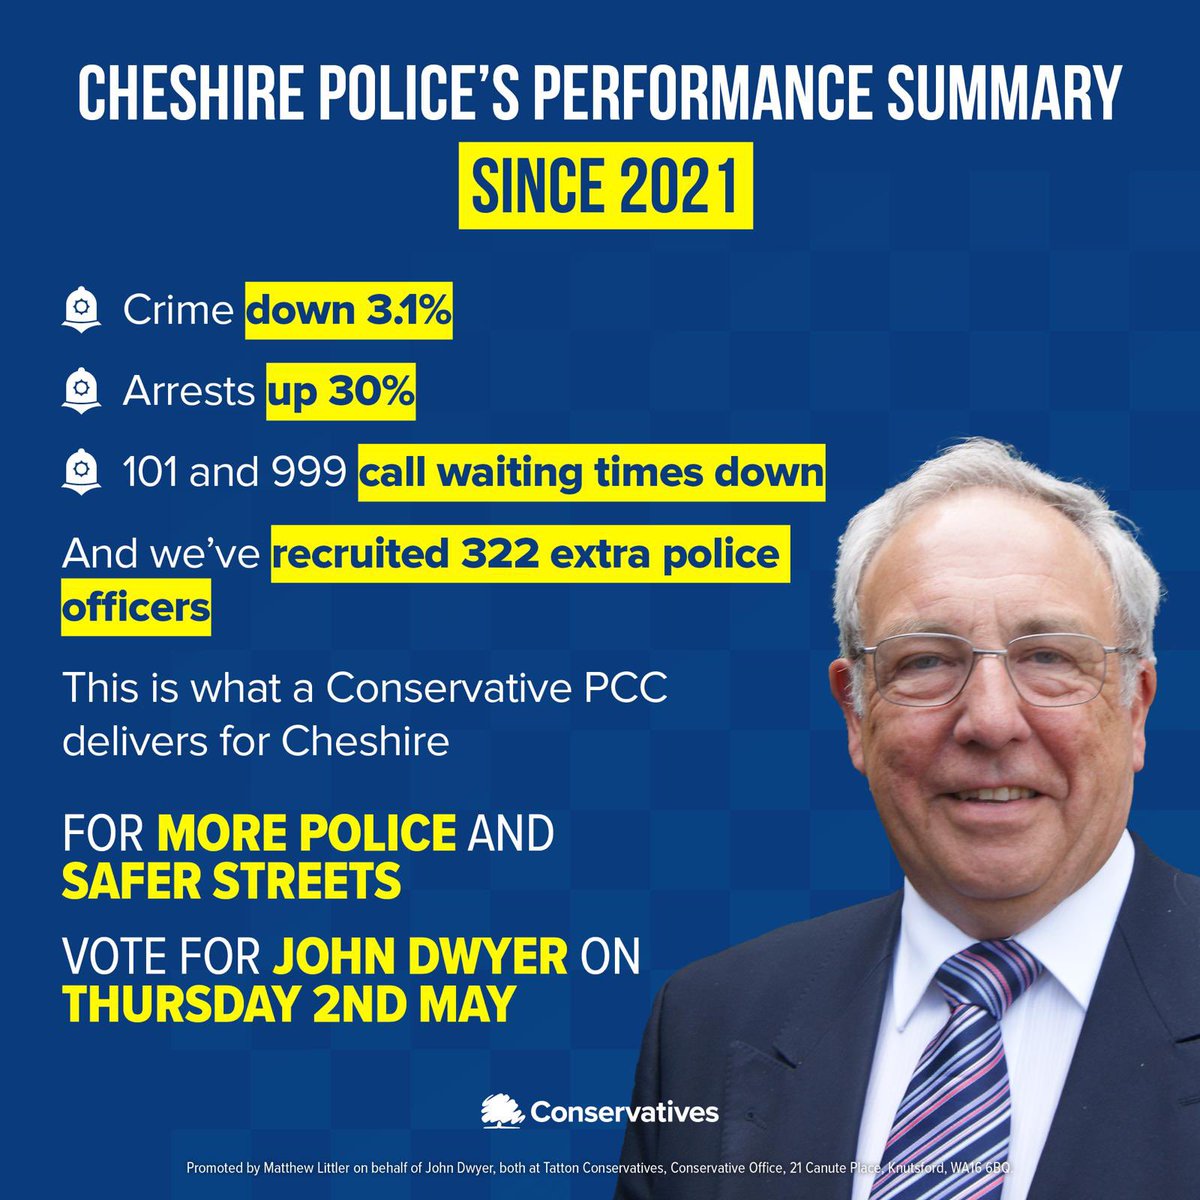 4 good reasons to re-elect John Dwyer in Cheshire on Thursday 2nd May. johndwyer.org.uk